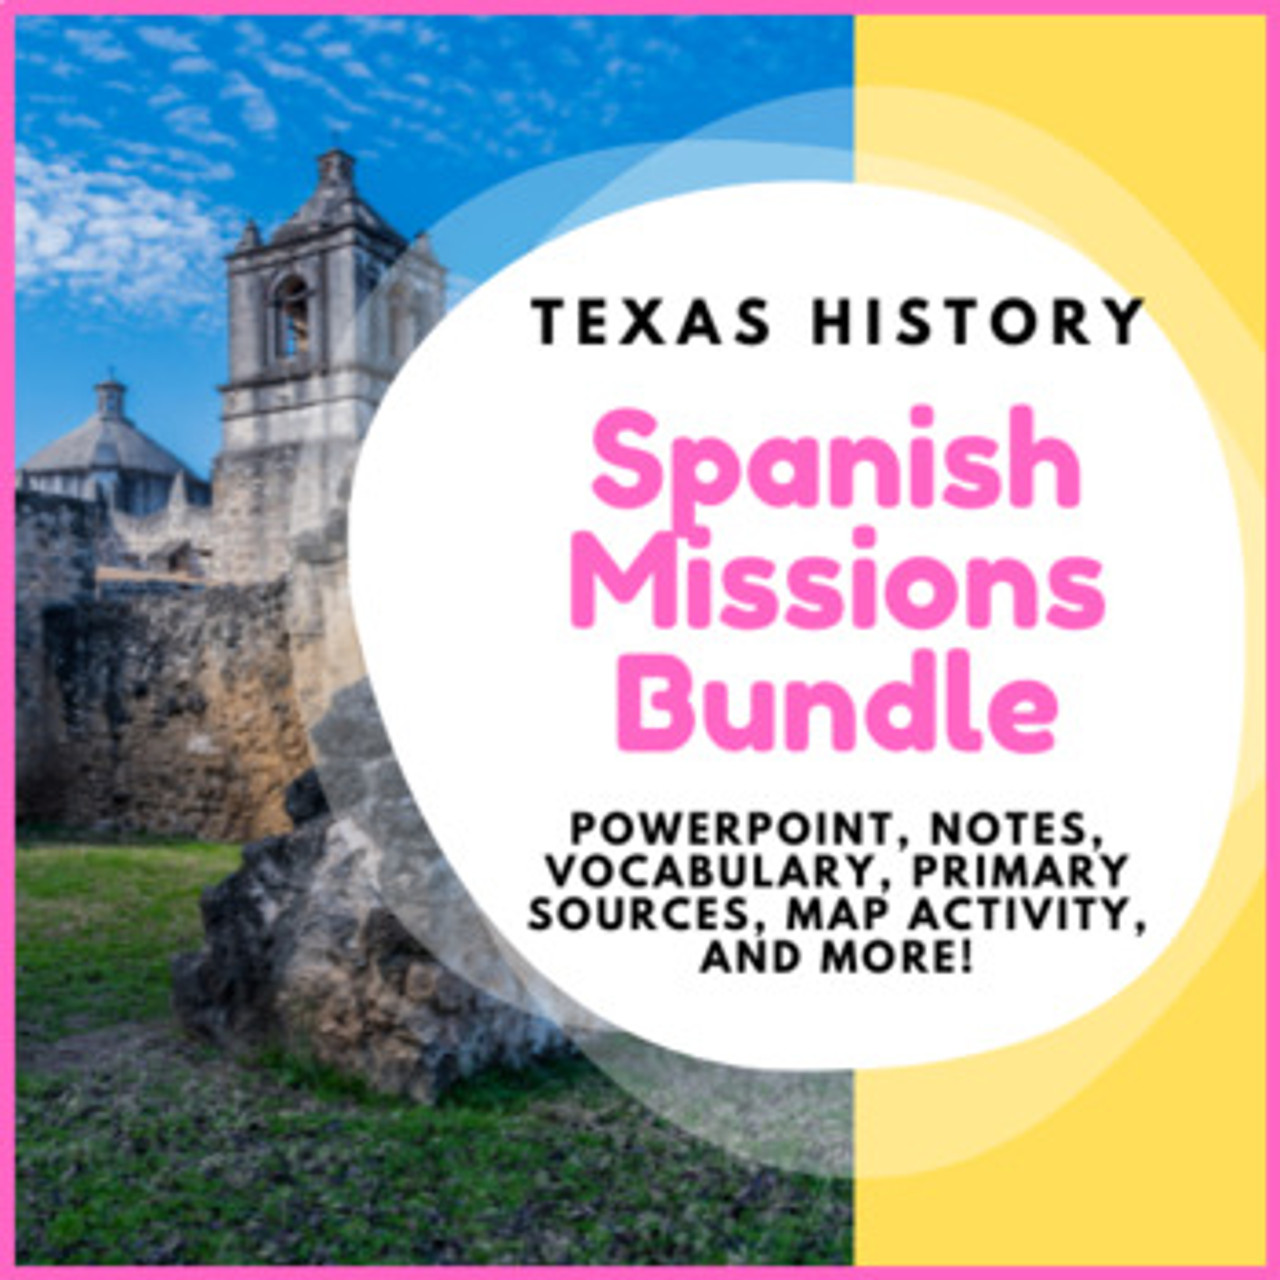 Texas History Mexican National & Colonization Diamond Puzzle w/ digital  version - Classful